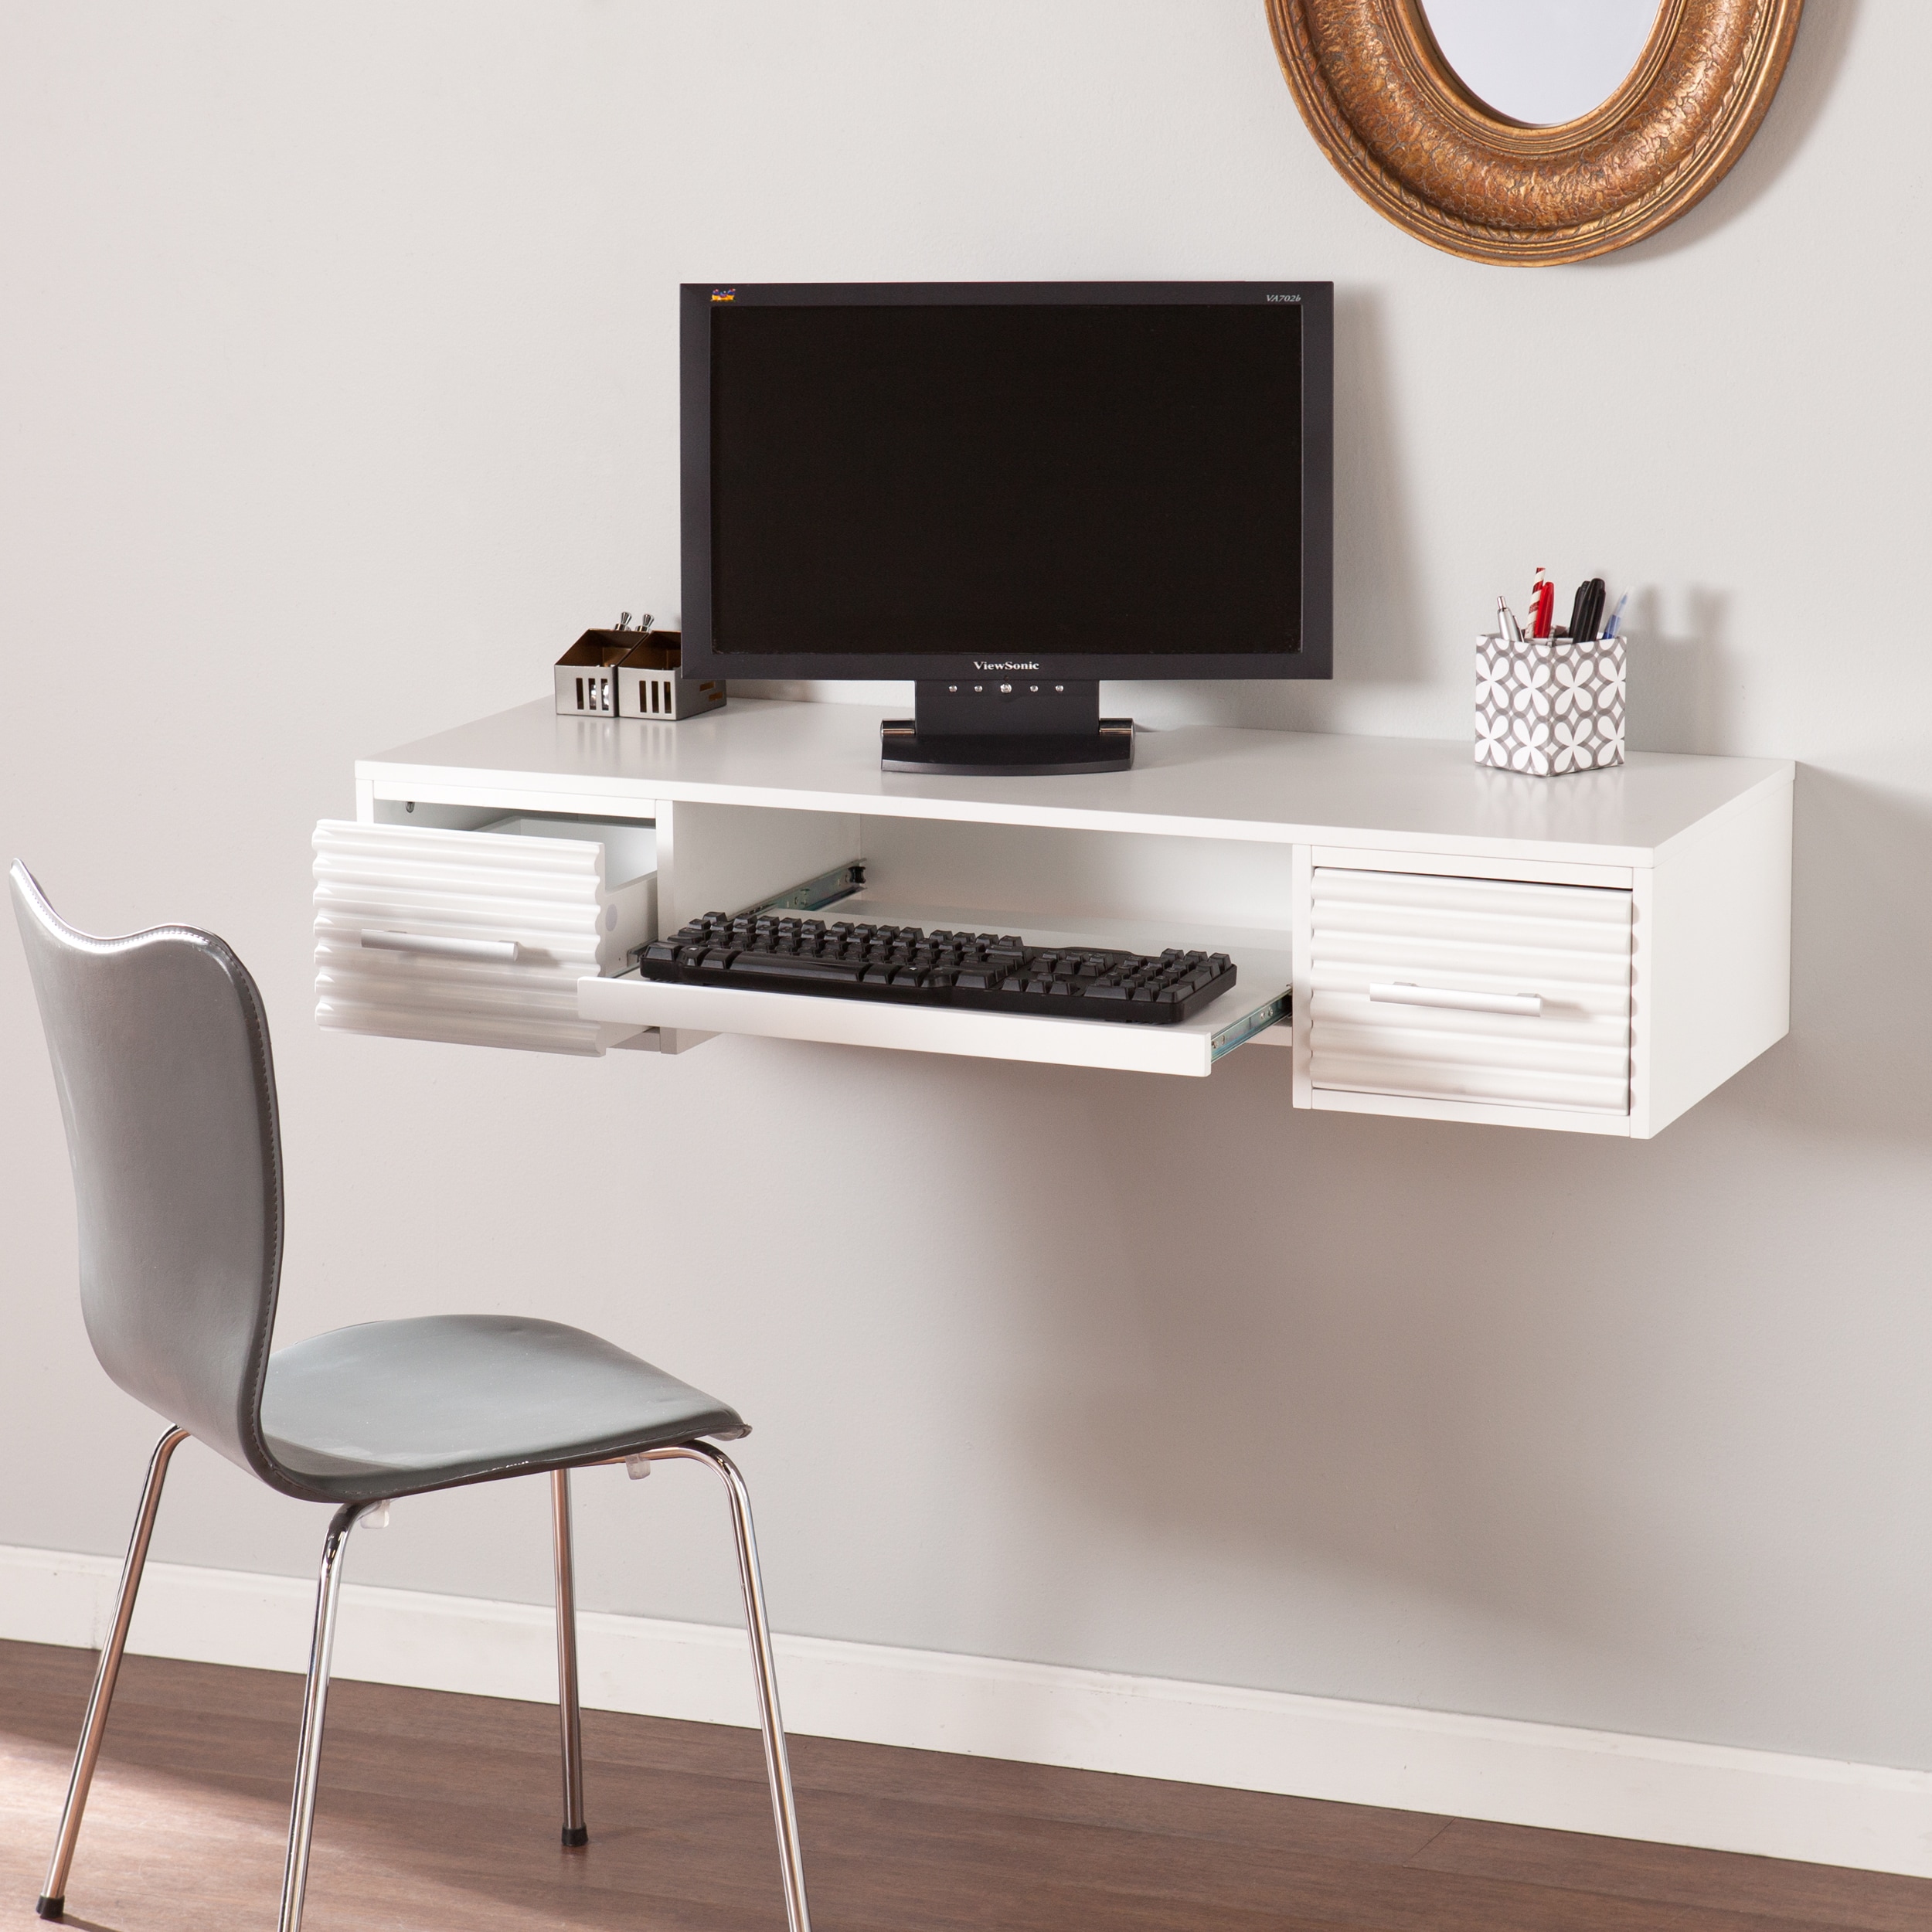 Shop Shaw White Floating Wall Mount Desk On Sale Overstock